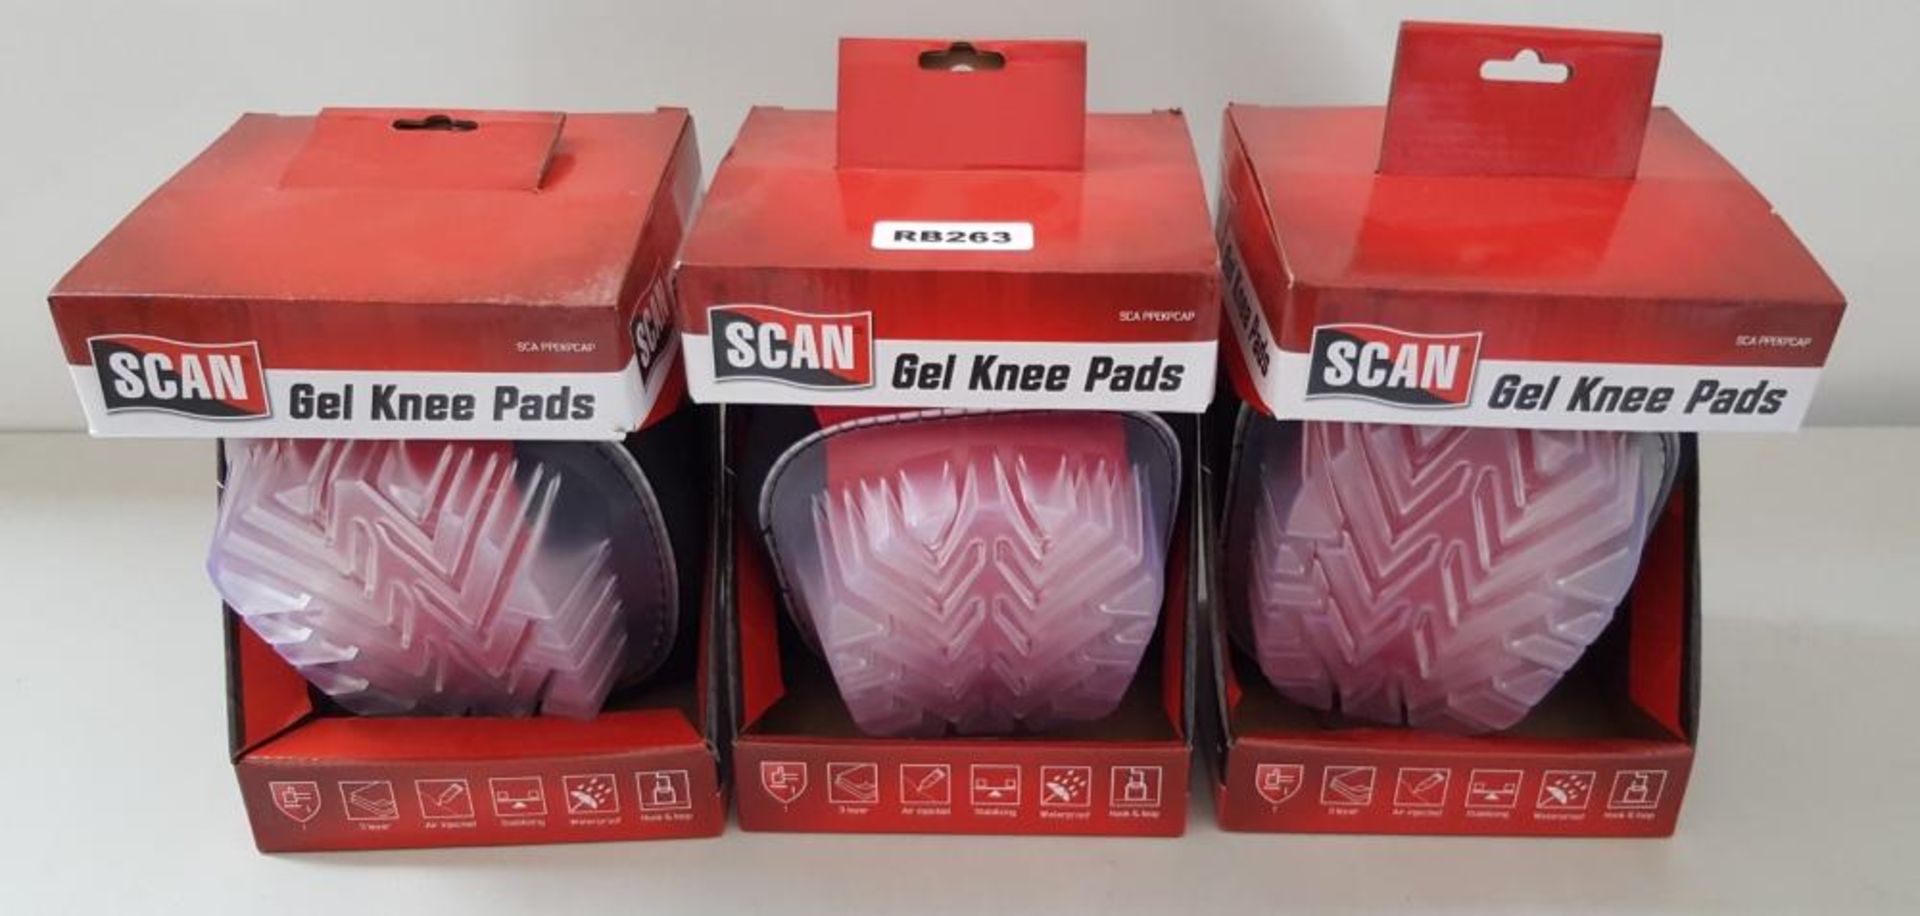 3 x New Scan Gel Knee Pads - Ref RB263 - CL394 - Location: Altrincham WA14As per our